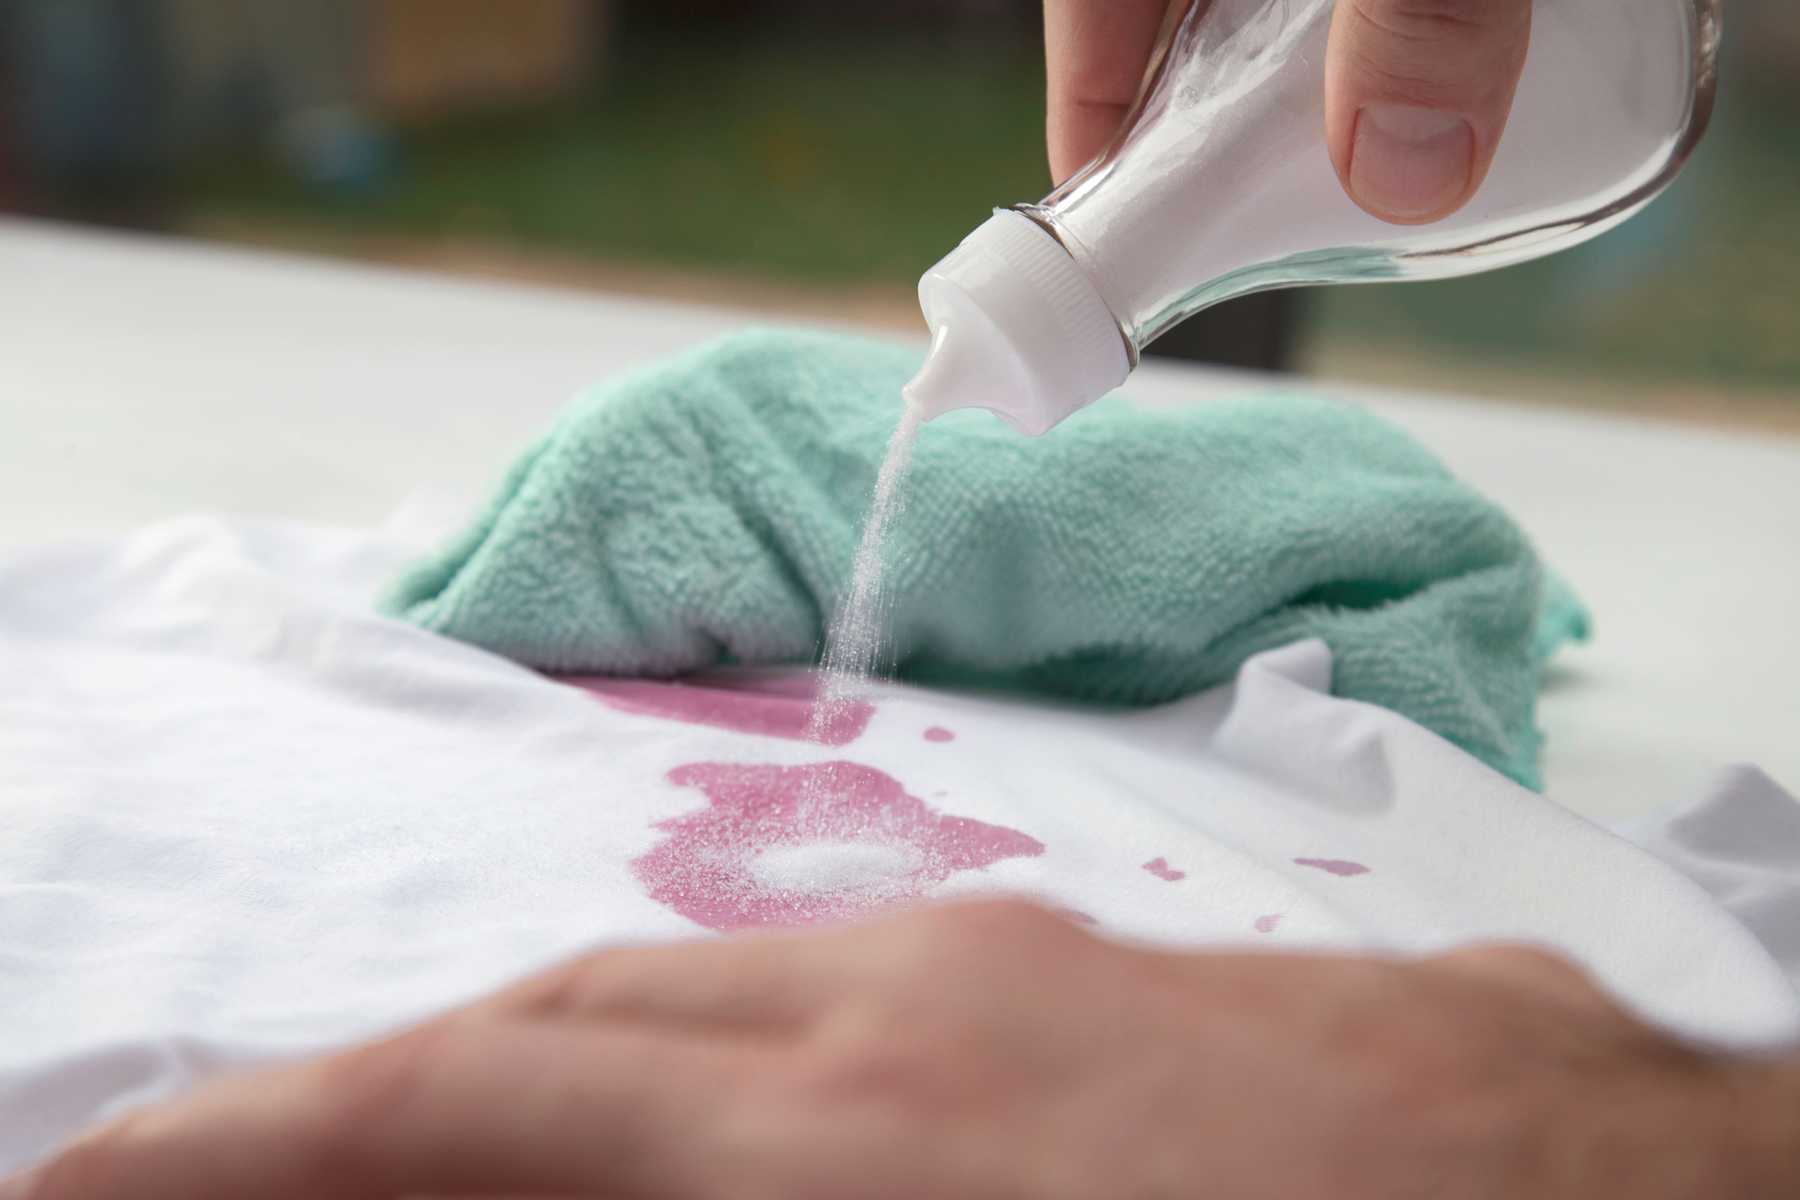 10 best ways to remove red wine stains (2020)